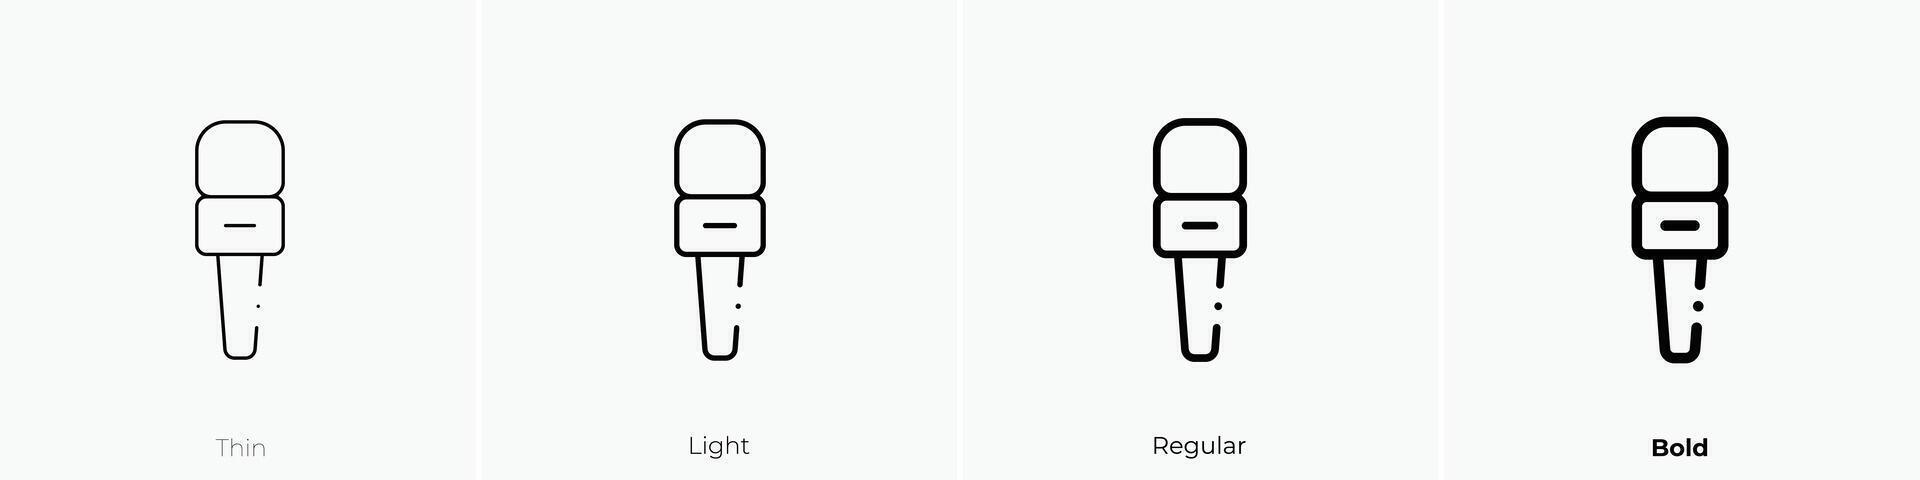 microphone icon. Thin, Light, Regular And Bold style design isolated on white background vector